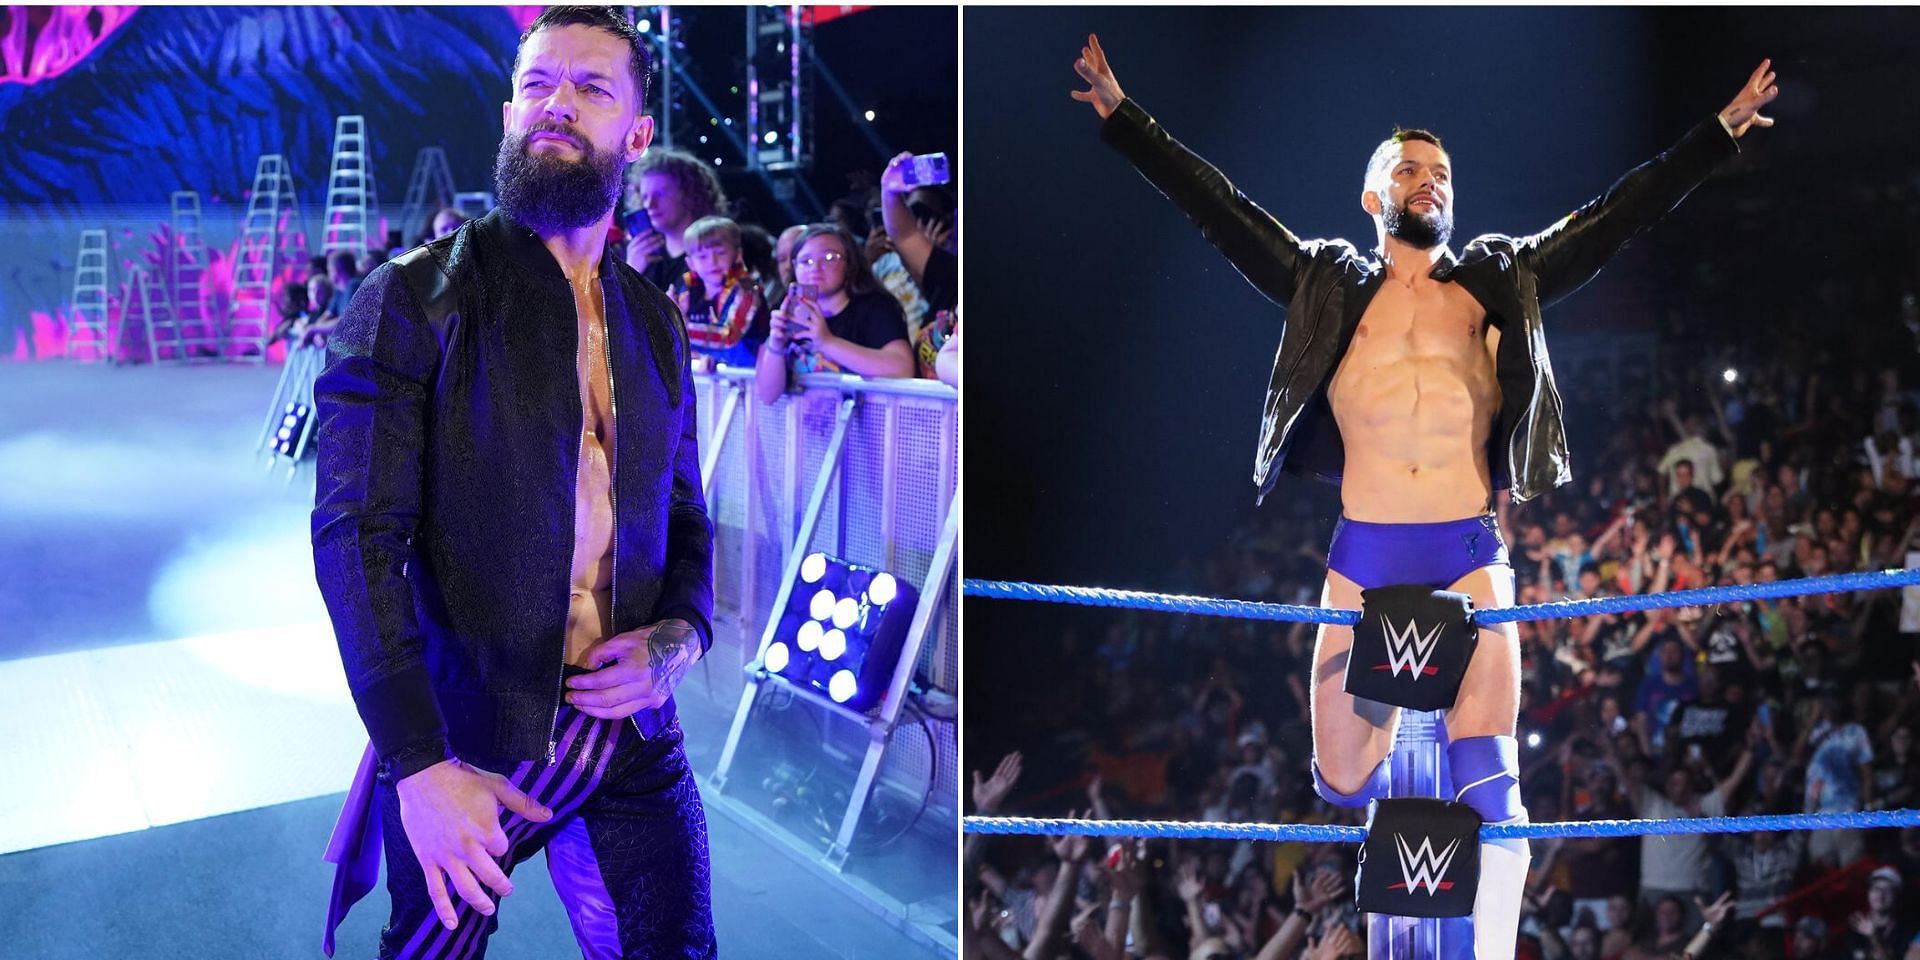 Finn Balor recently signed a new deal with WWE